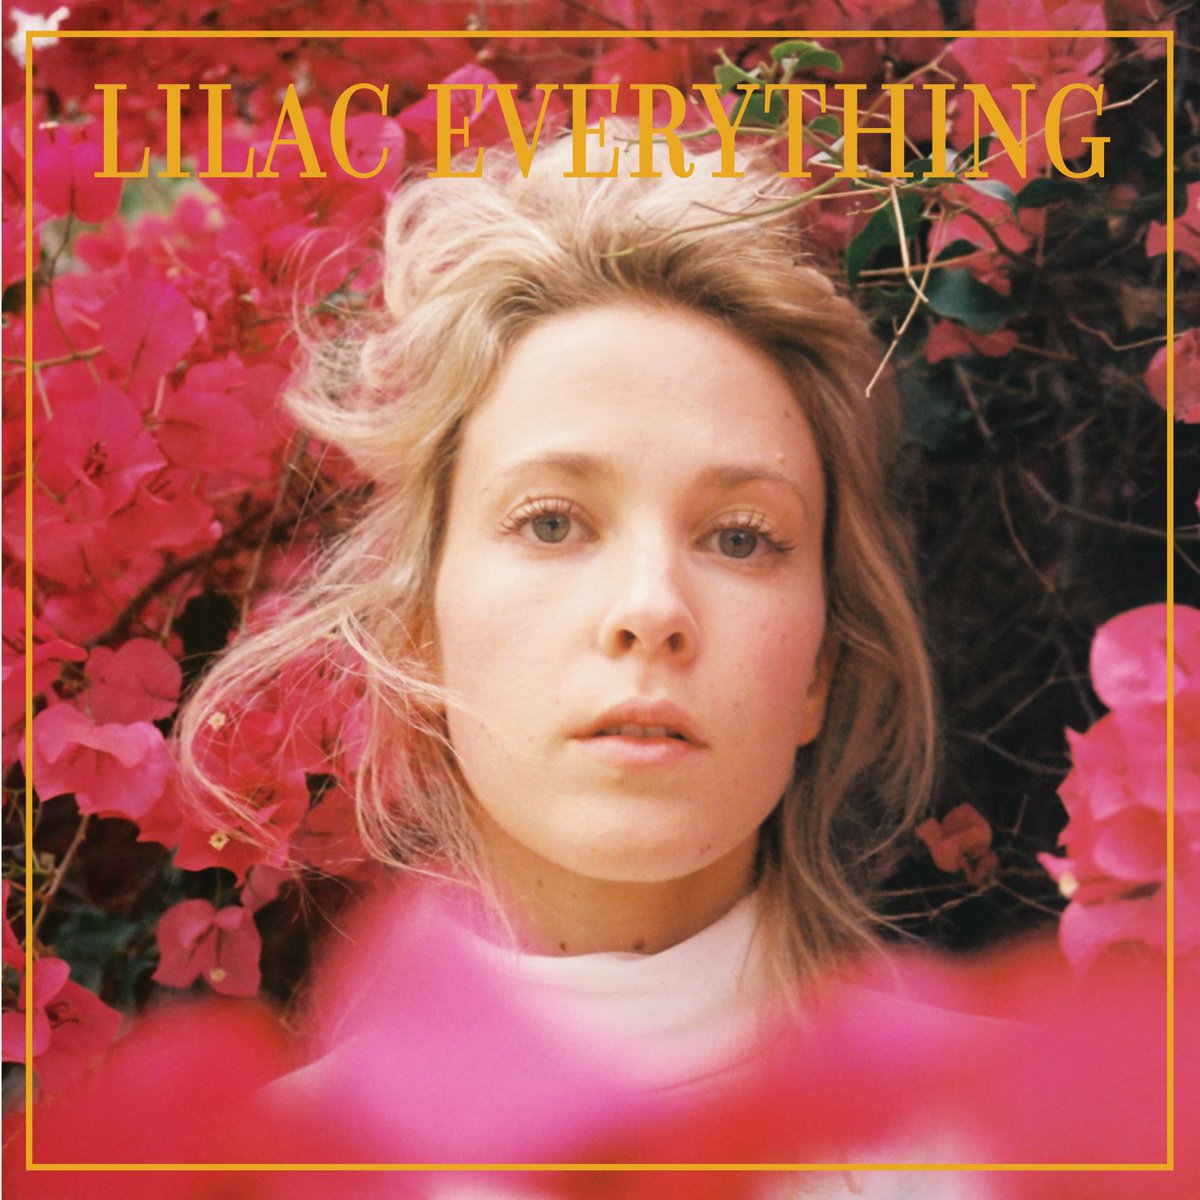 My new record ‘Lilac Everything’ will be out September 14. I’m so exited to share this part of my creative journey with all of you and I hope you enjoy the experience of these songs I wrote from the truest part of my being! You can listen and pre-order from link in bio xxx